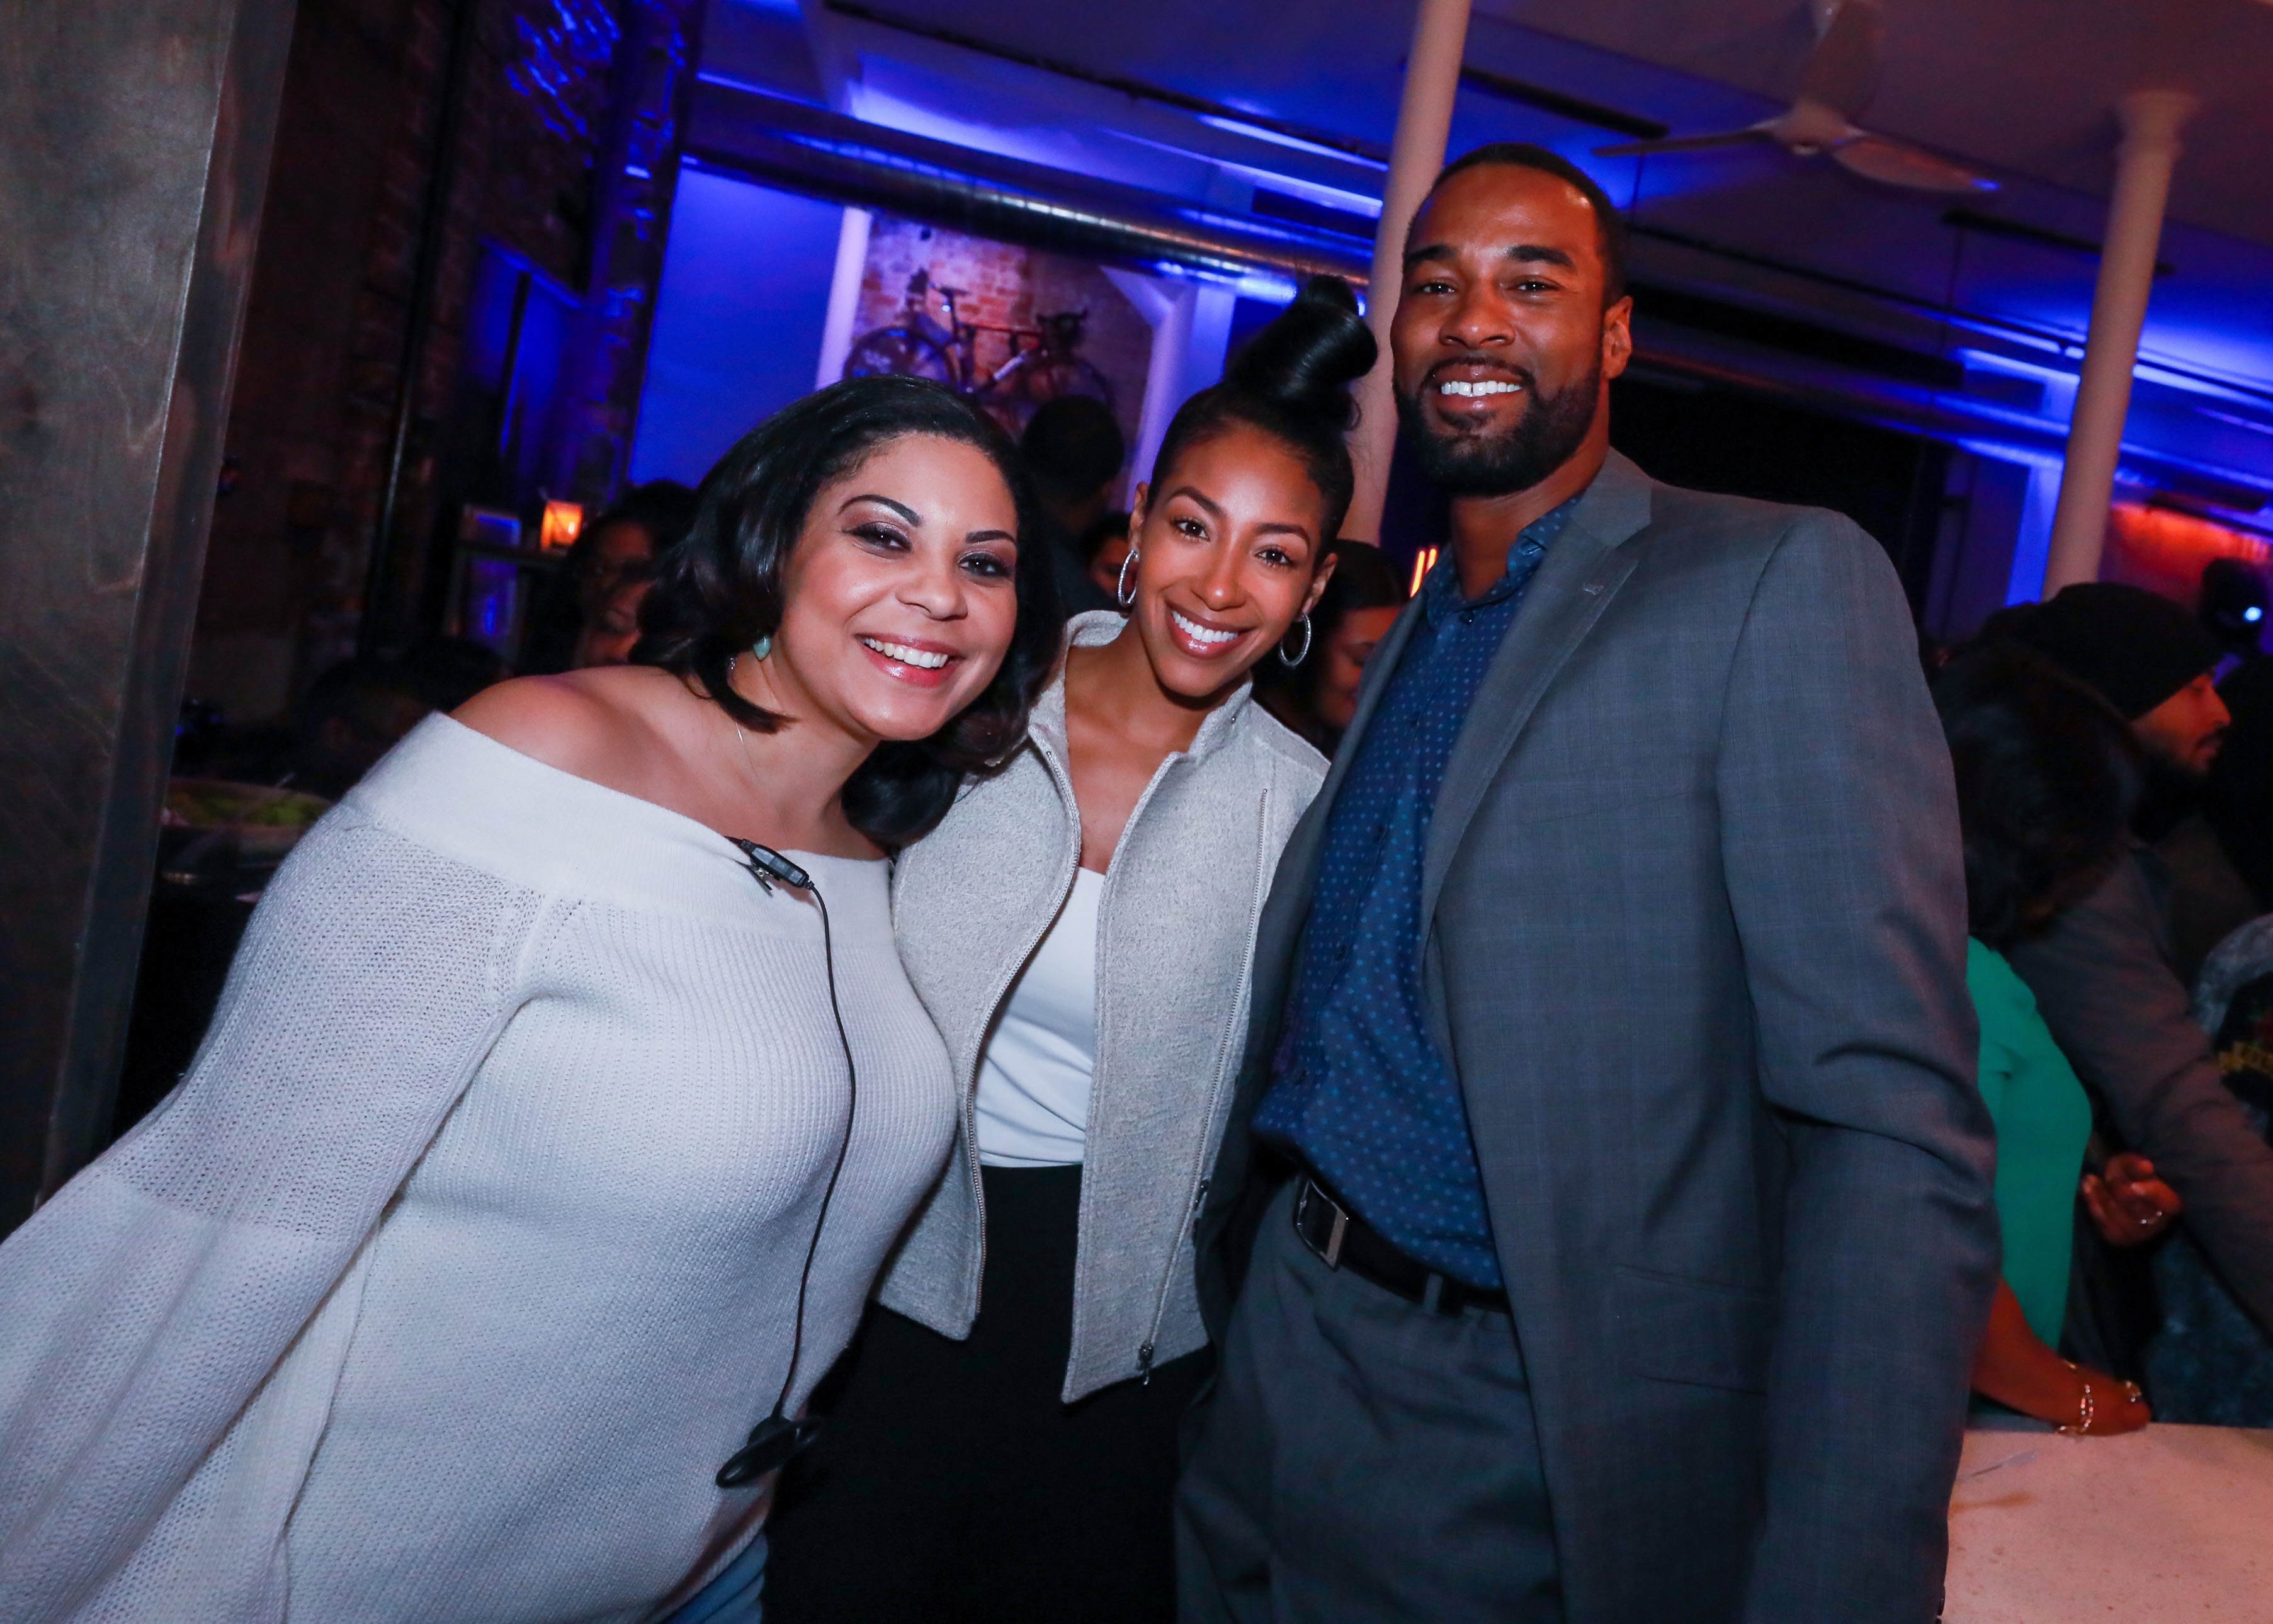 A guest, Brittney McNorton, and Calvin Johnson Jr. pose at the H.O.M.E. by Martell event on November 29, 2017, in Detroit, Michigan. | Source: Getty Images